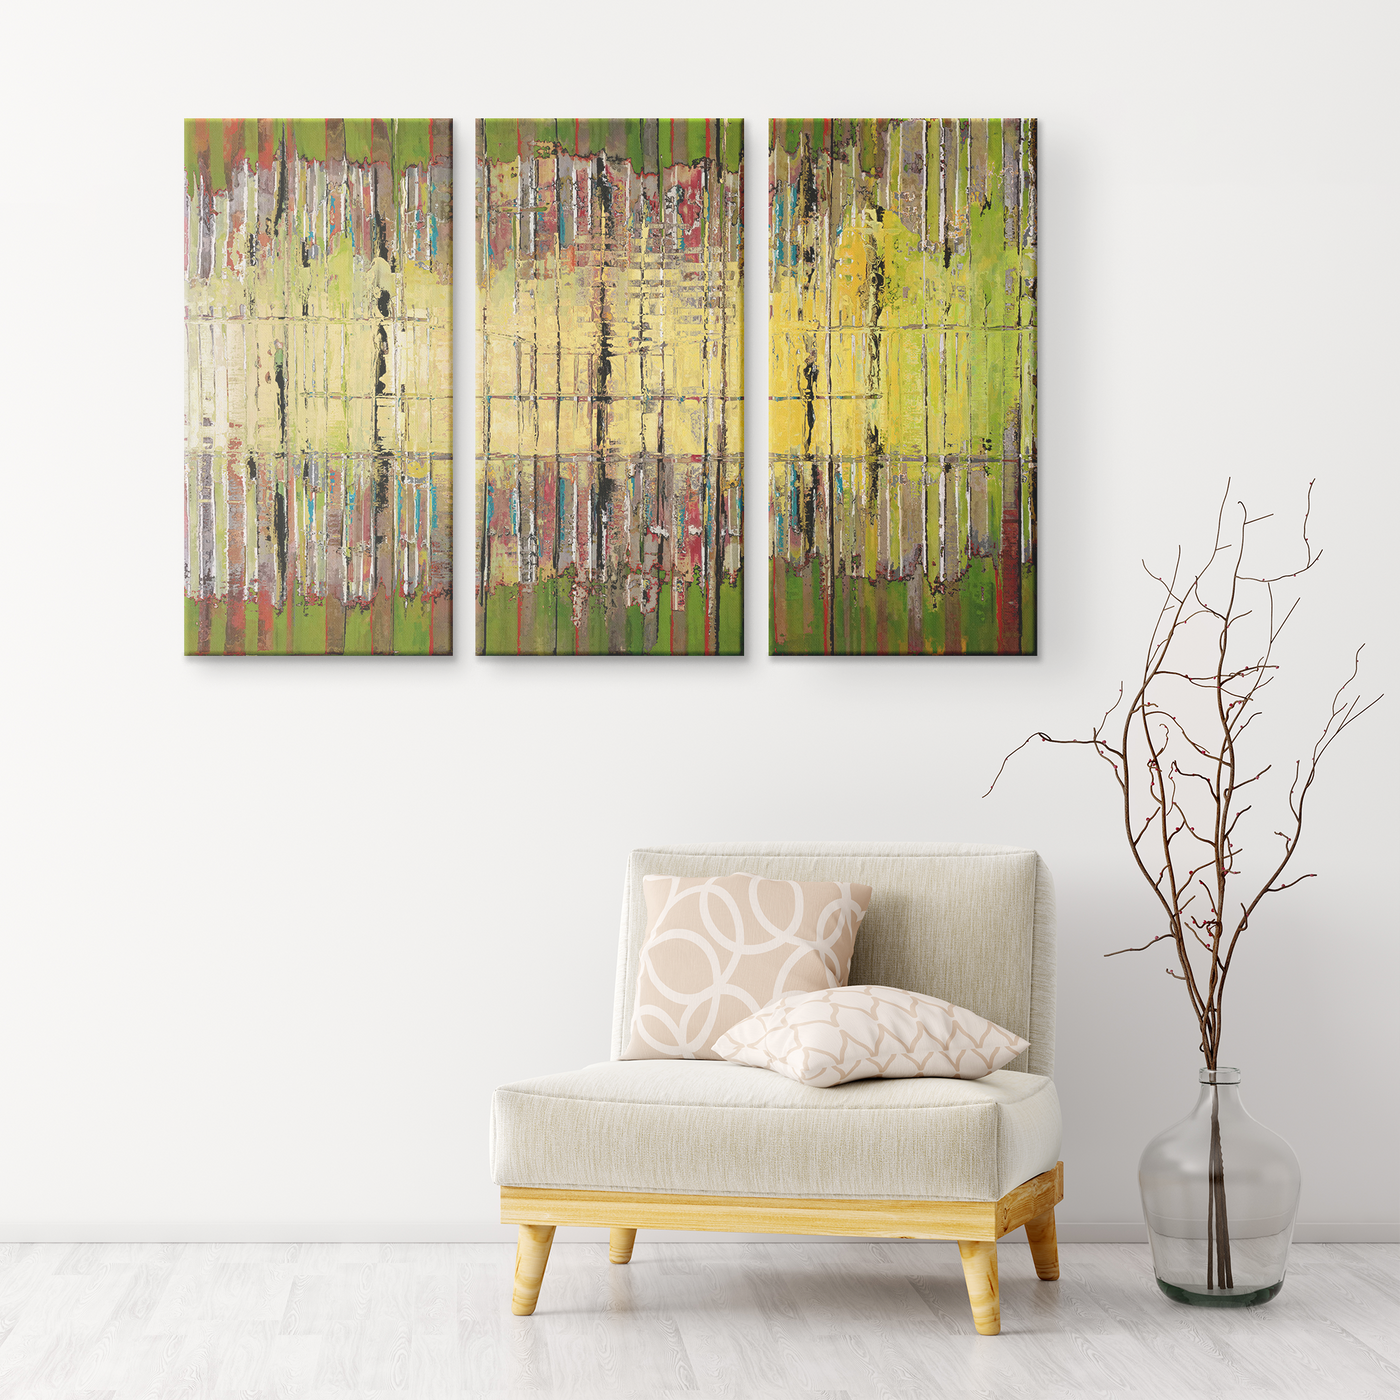 Bamboo Curtain Triptych